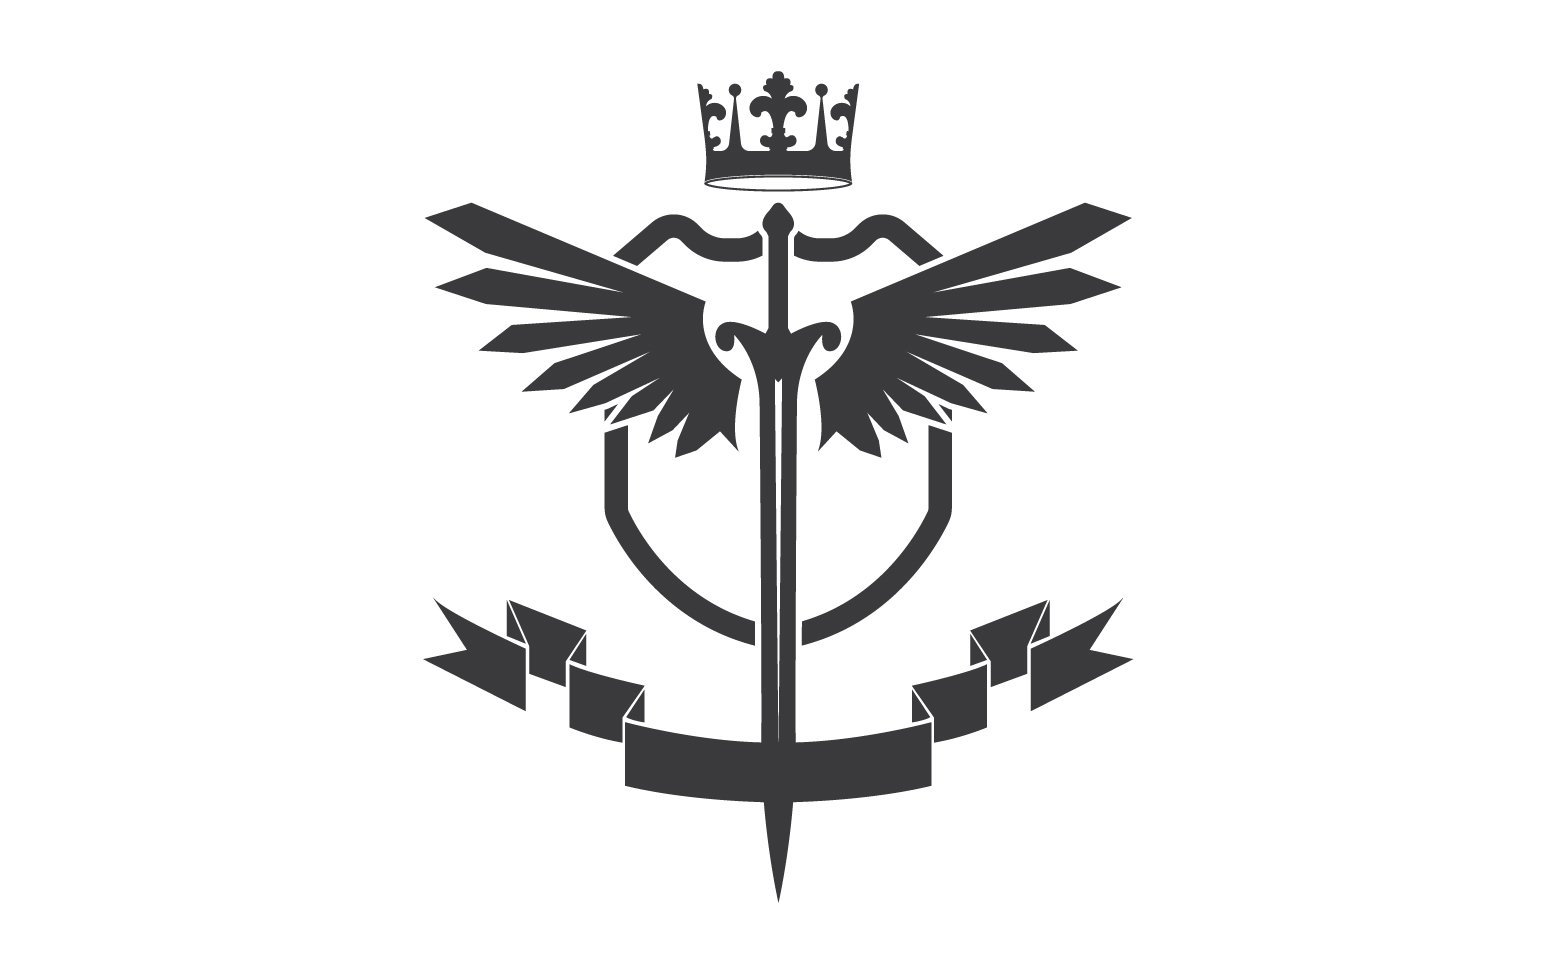 Wing sword and crown king lord logo icon v53